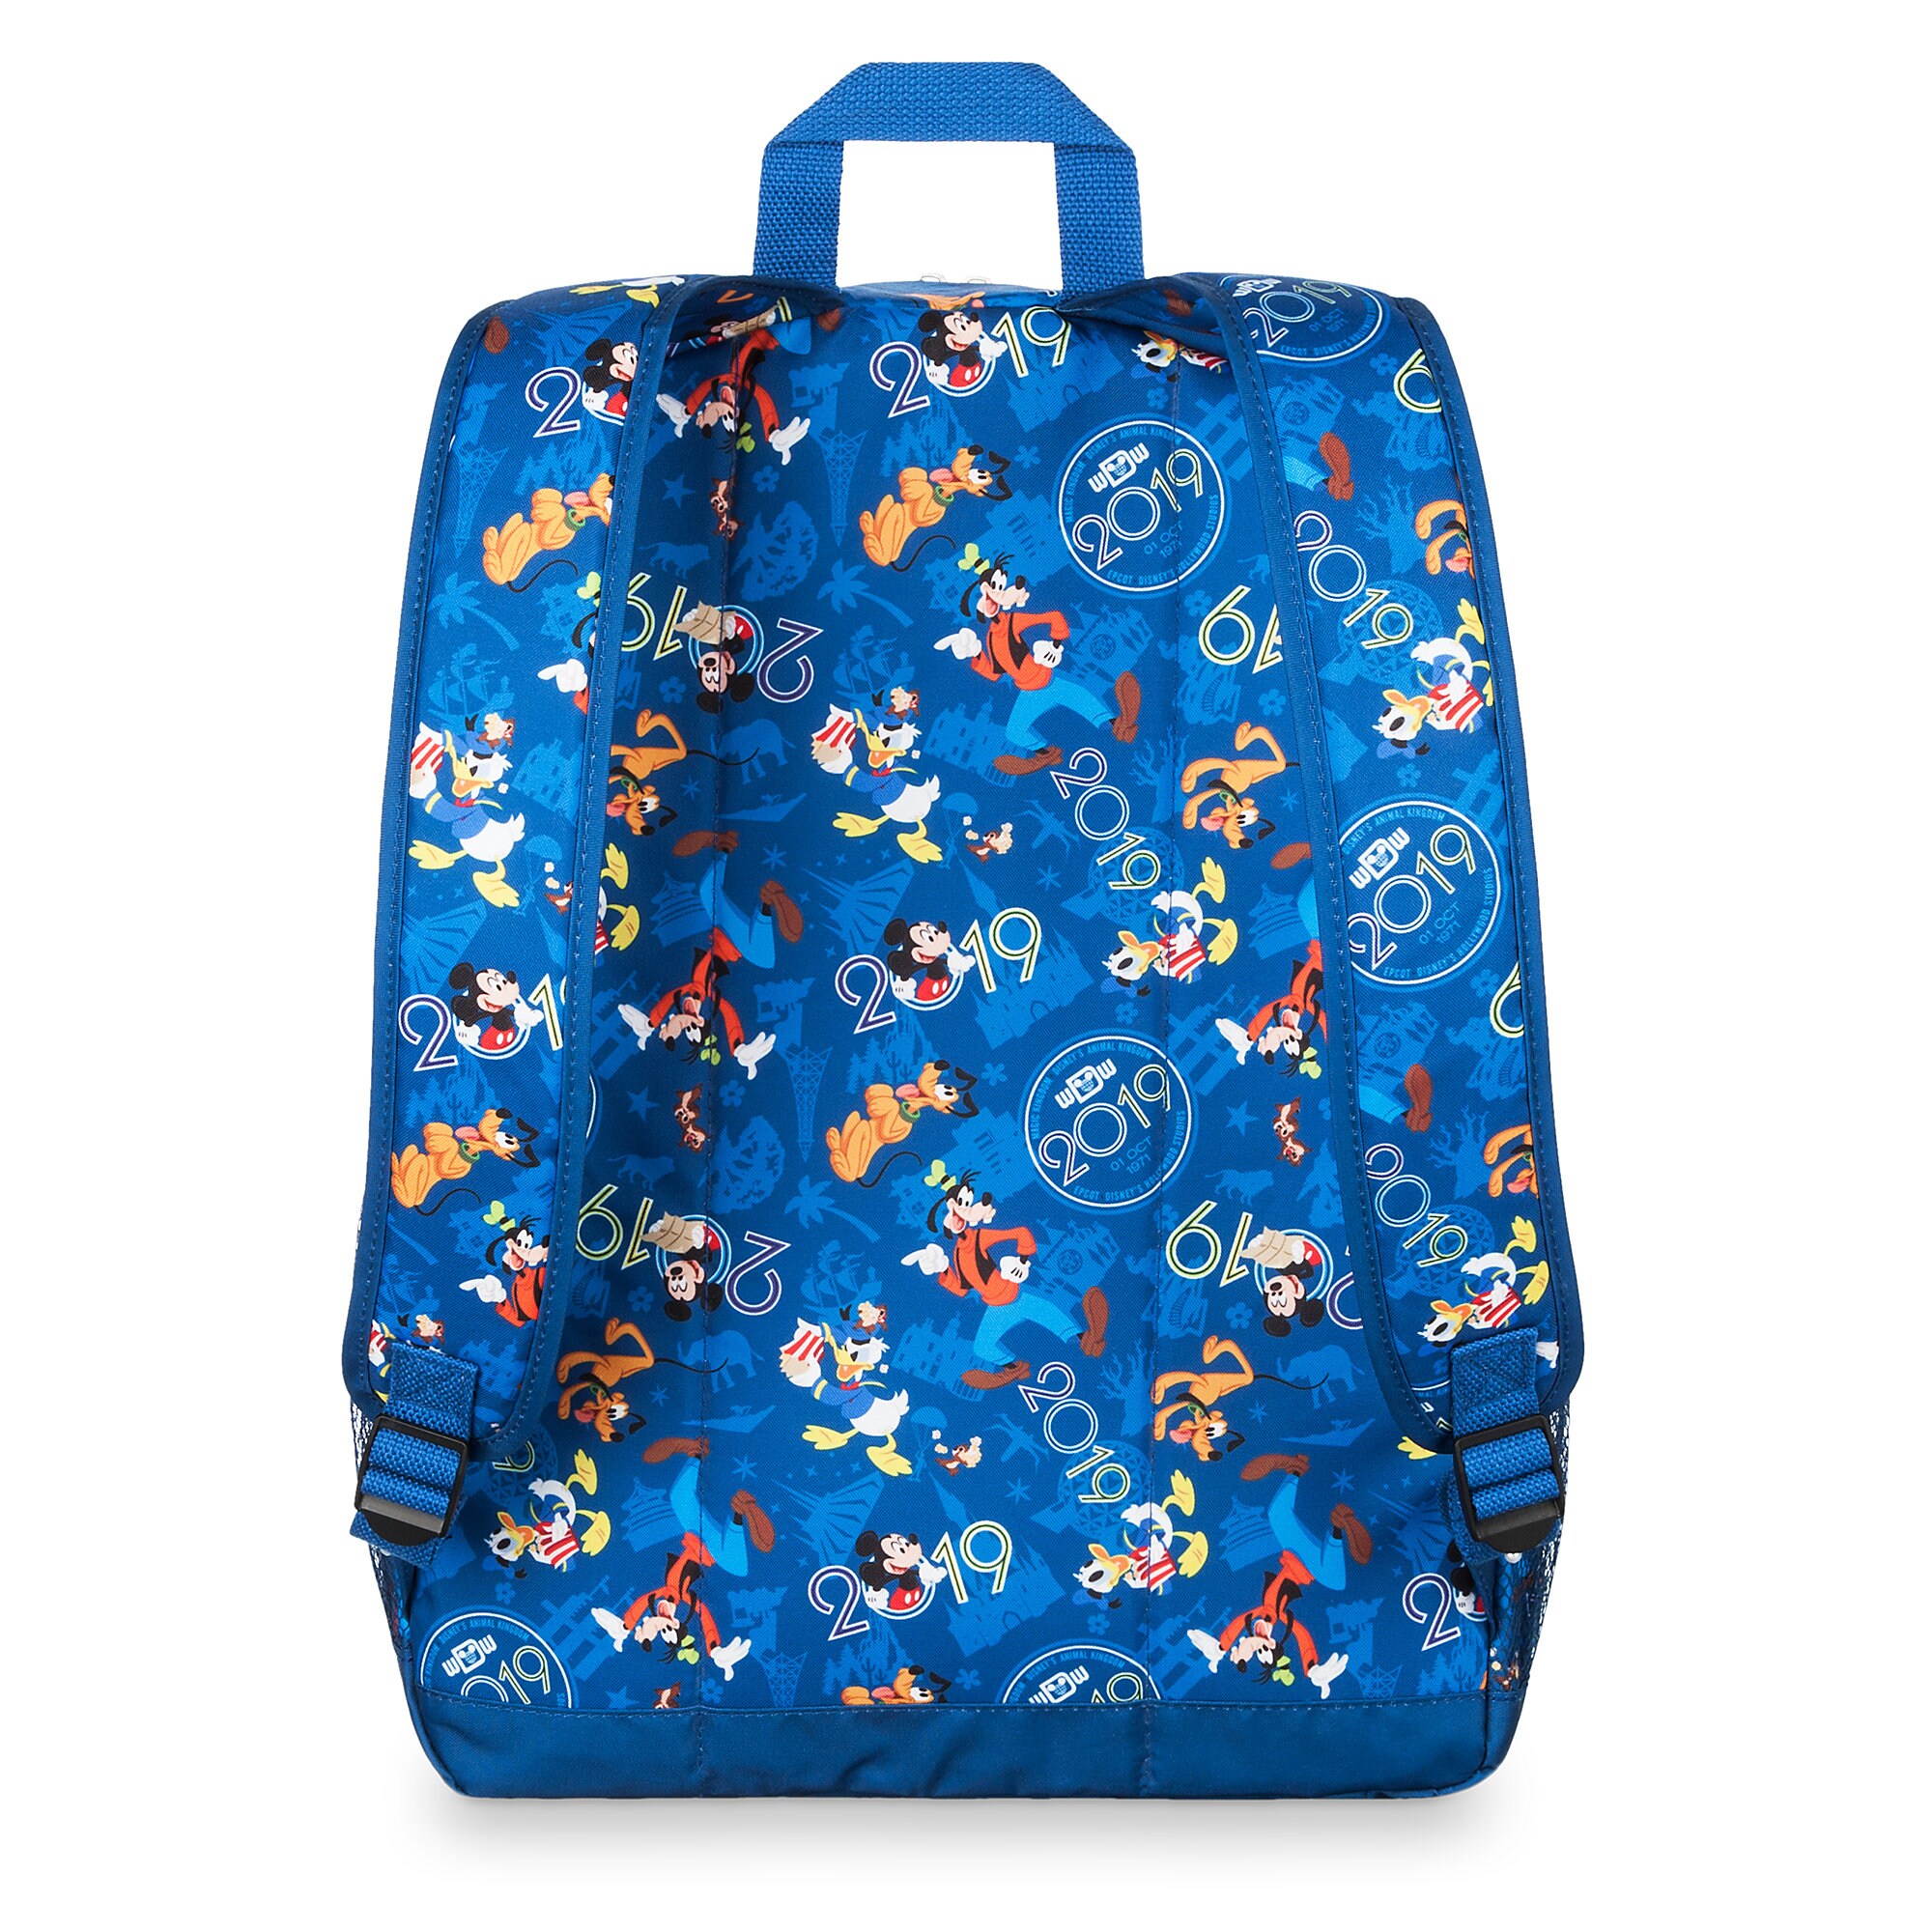 Mickey Mouse and Friends Walt Disney World Backpack - 2019